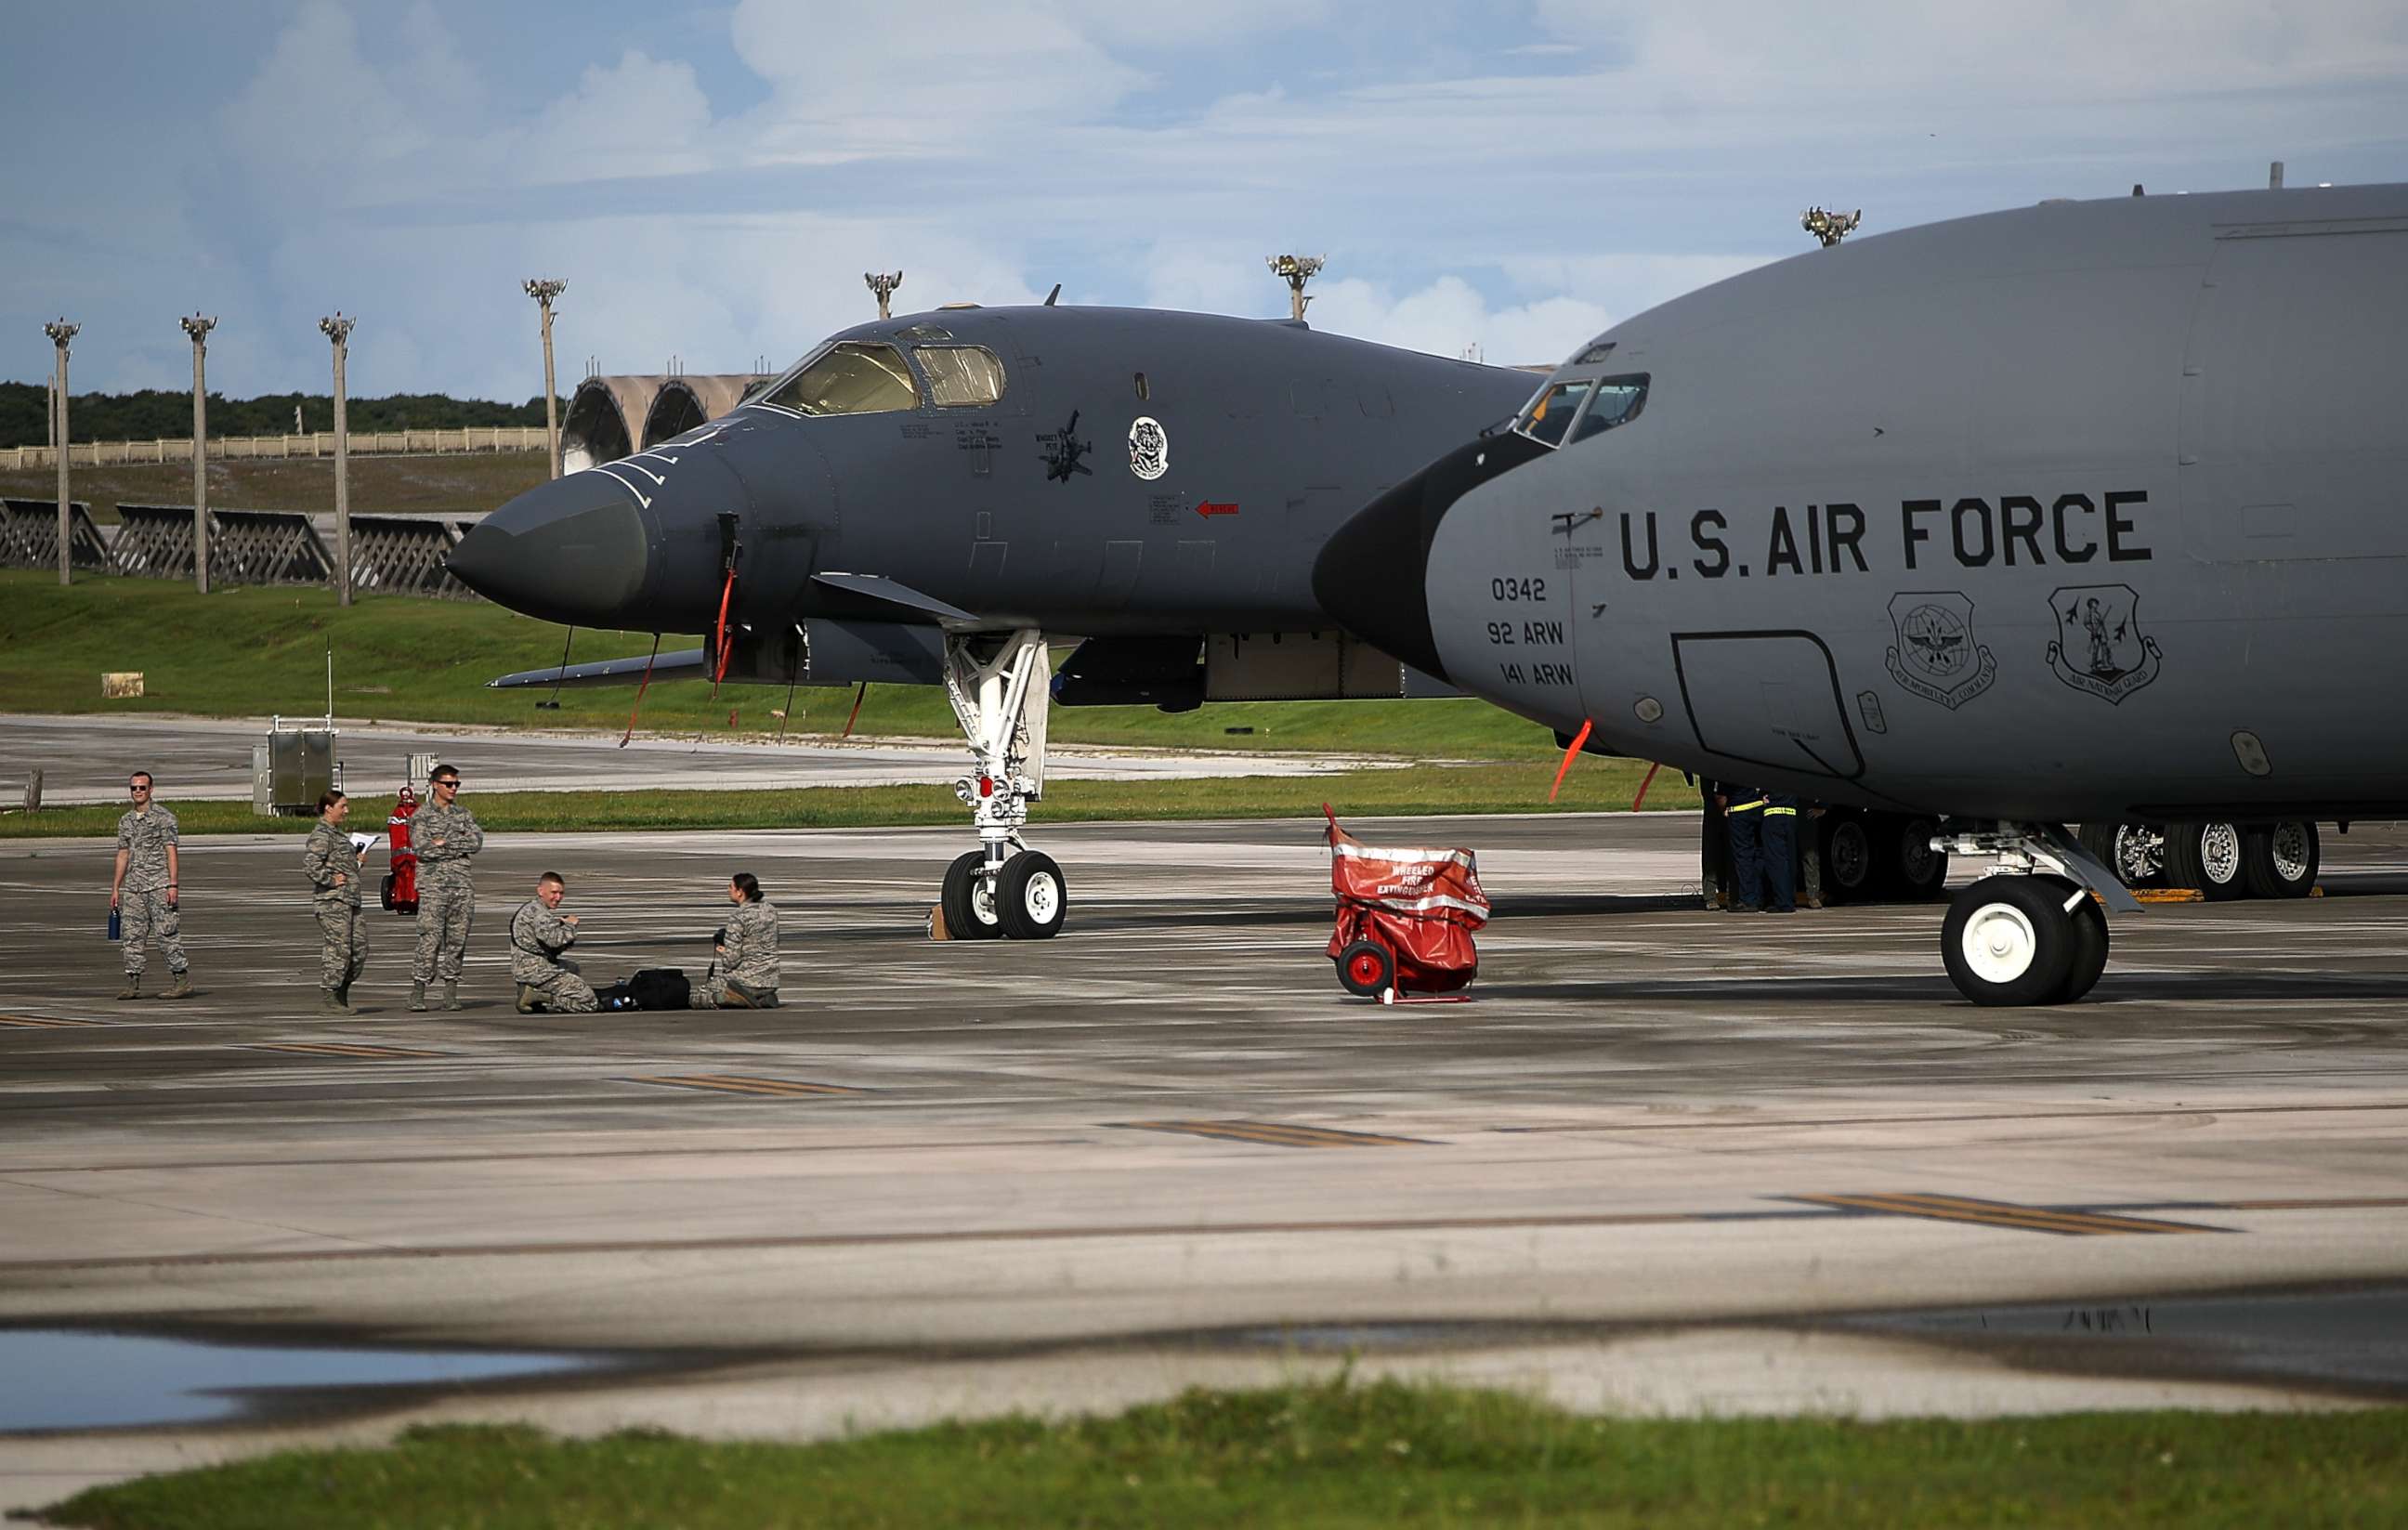 PHOTO: A U.S. Air Force Rockwell B-1B Lancer (L) and a Boeing KC-135 Stratotanker (R) sit on the tarmac at Andersen Air Force base, Aug. 17, 2017 in Yigo, Guam. 